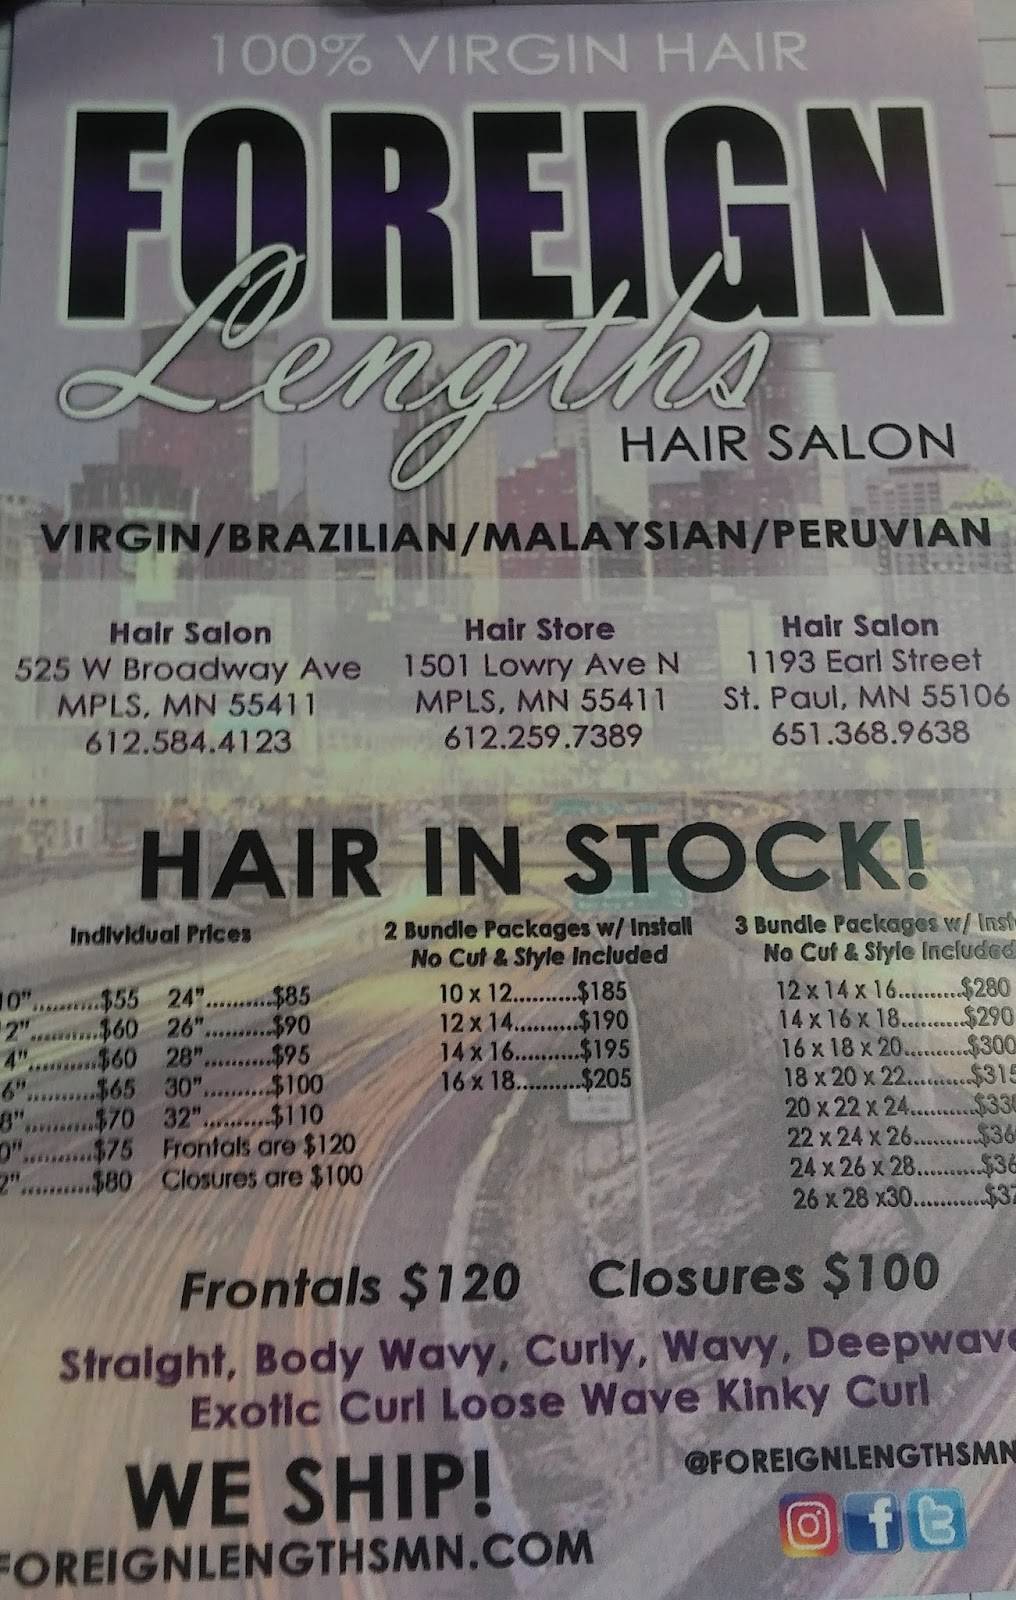 Foreign Lengths Hair Shop | 525 W Broadway Ave, Minneapolis, MN 55411 | Phone: (612) 584-4123